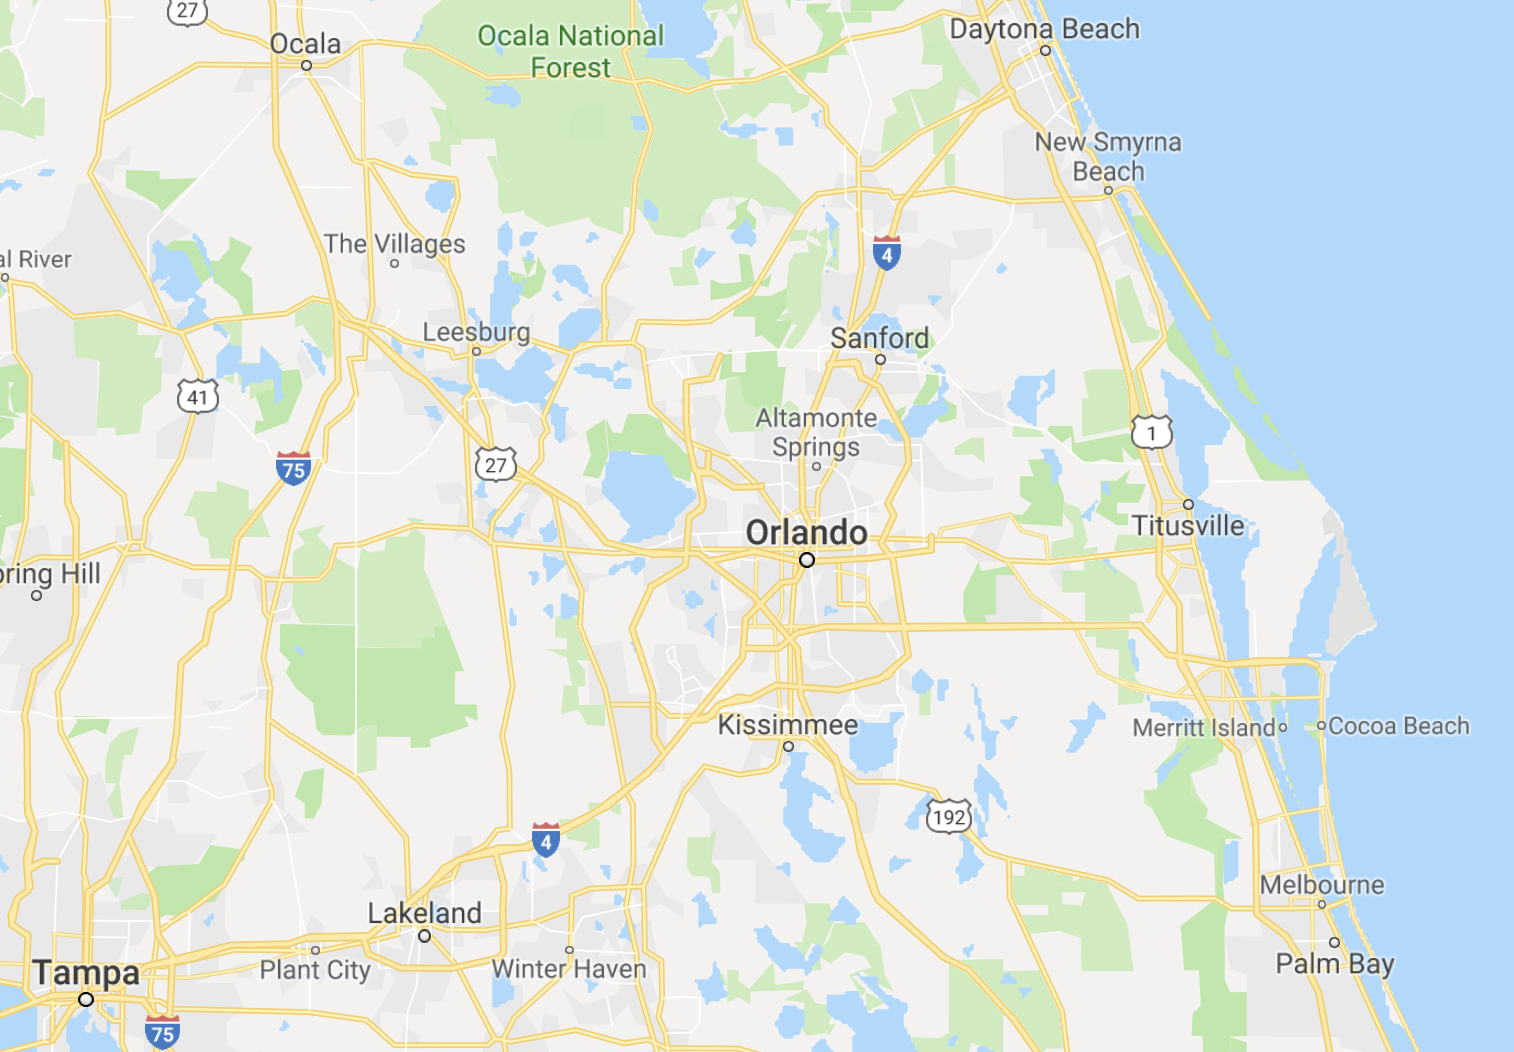 Image of map showing All Florida Parking Lot Striping serves Brevard County (Cocoa Beach, Melbourne, etc.) and throughout Central Florida (from Daytona Beach to Vero Beach to Tampa)